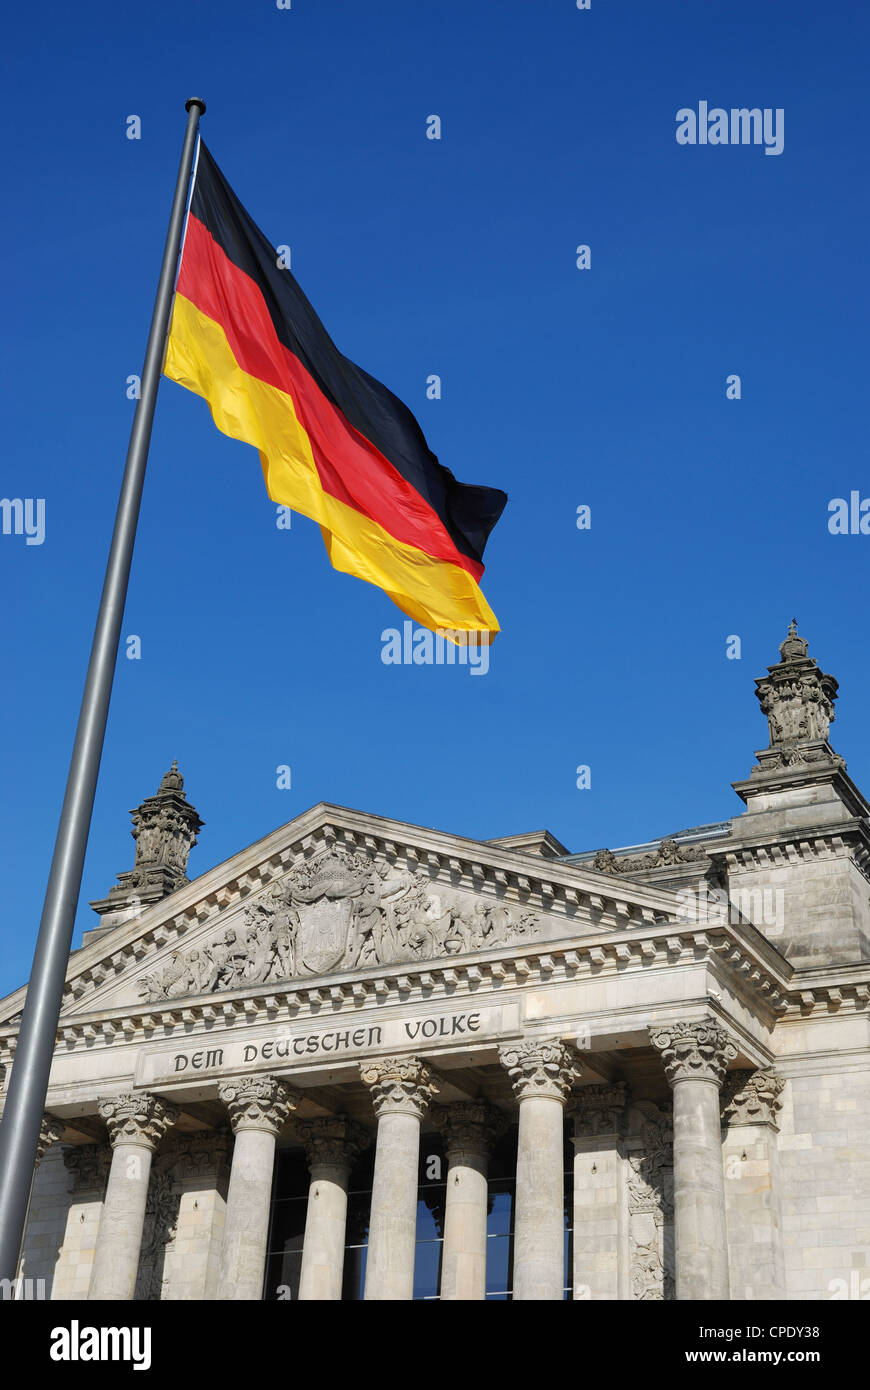 The German flag in front of the Reichstag building, Berlin, Germany. Stock Photo